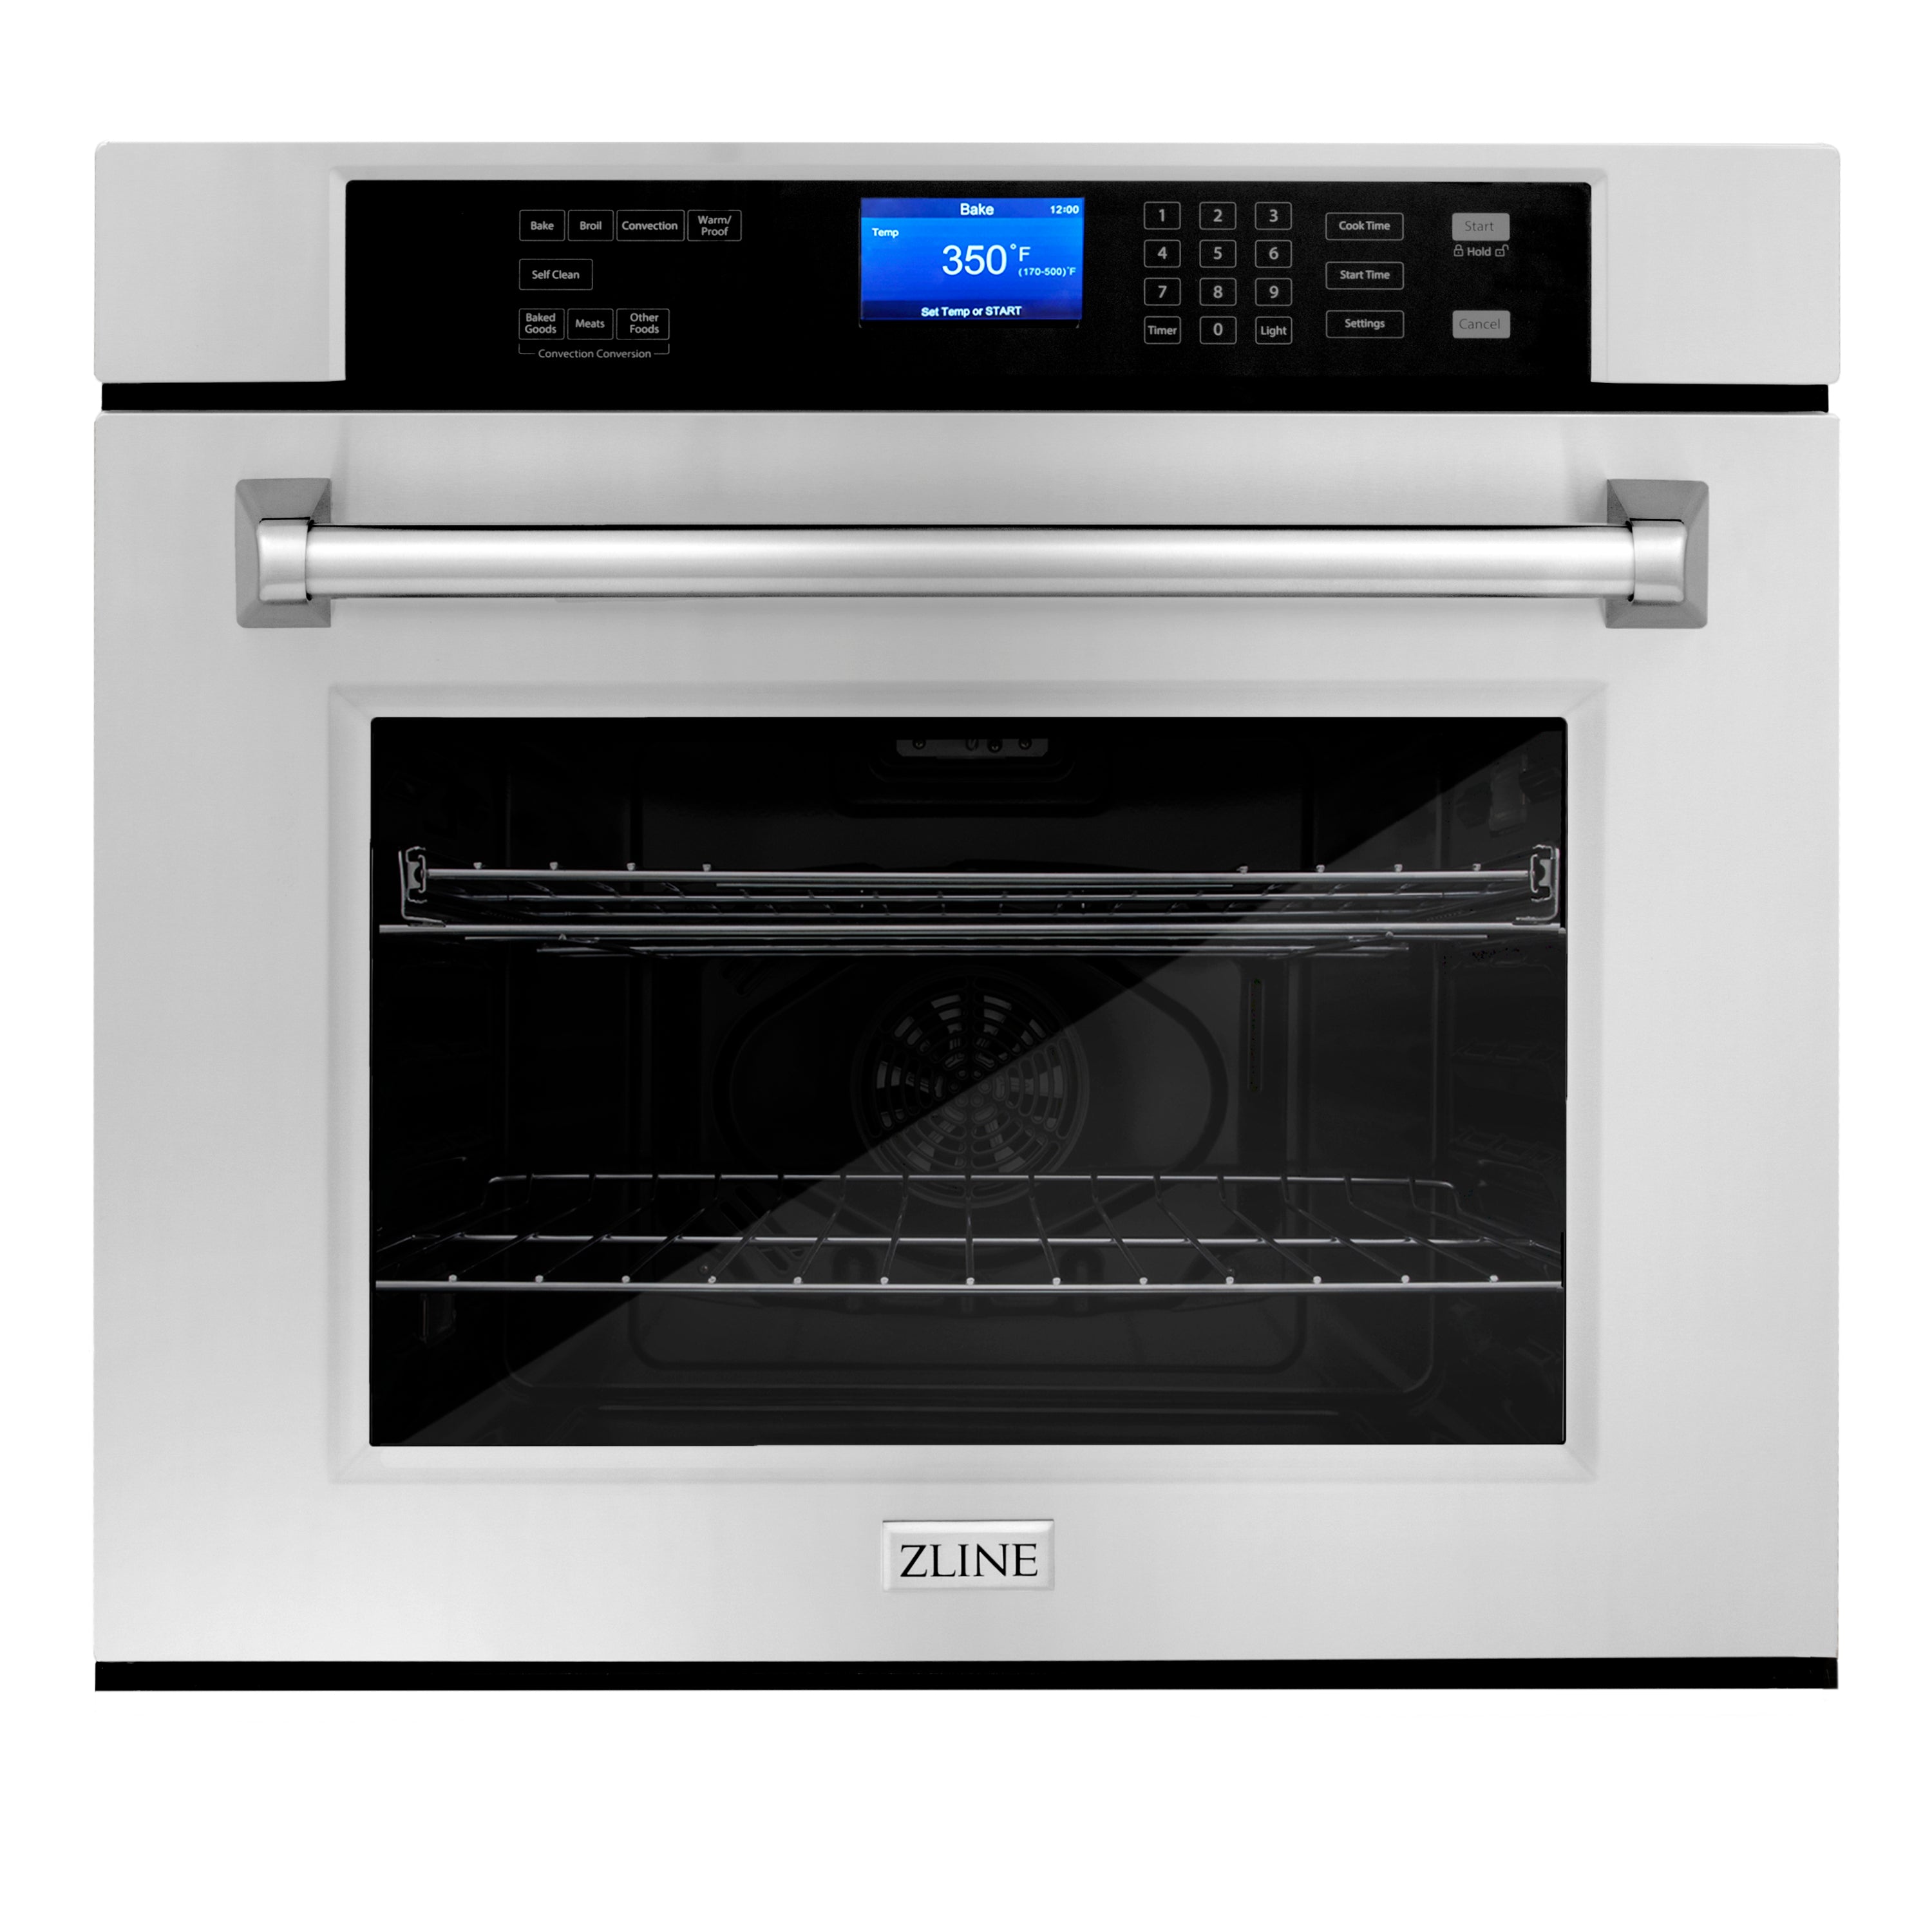 ZLINE Stainless Steel 24" Built-in Convection Microwave Oven and 30" Single Wall Oven with Self Clean